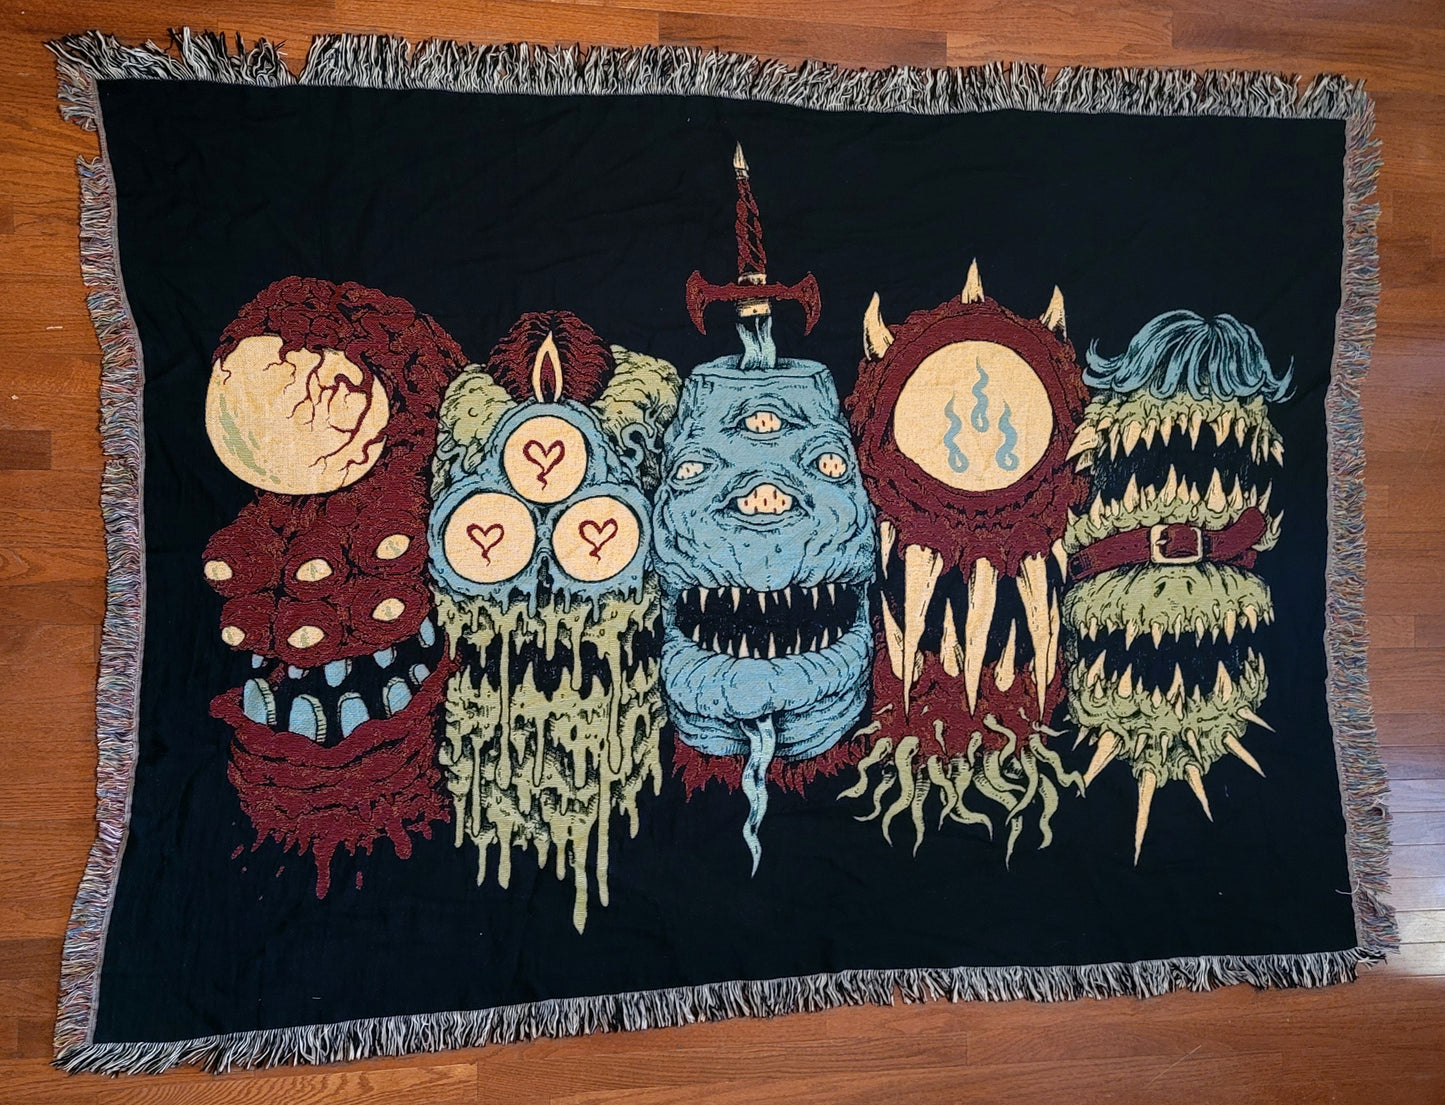 Sword Stabbed 5 Heads in a Row Woven Blanket